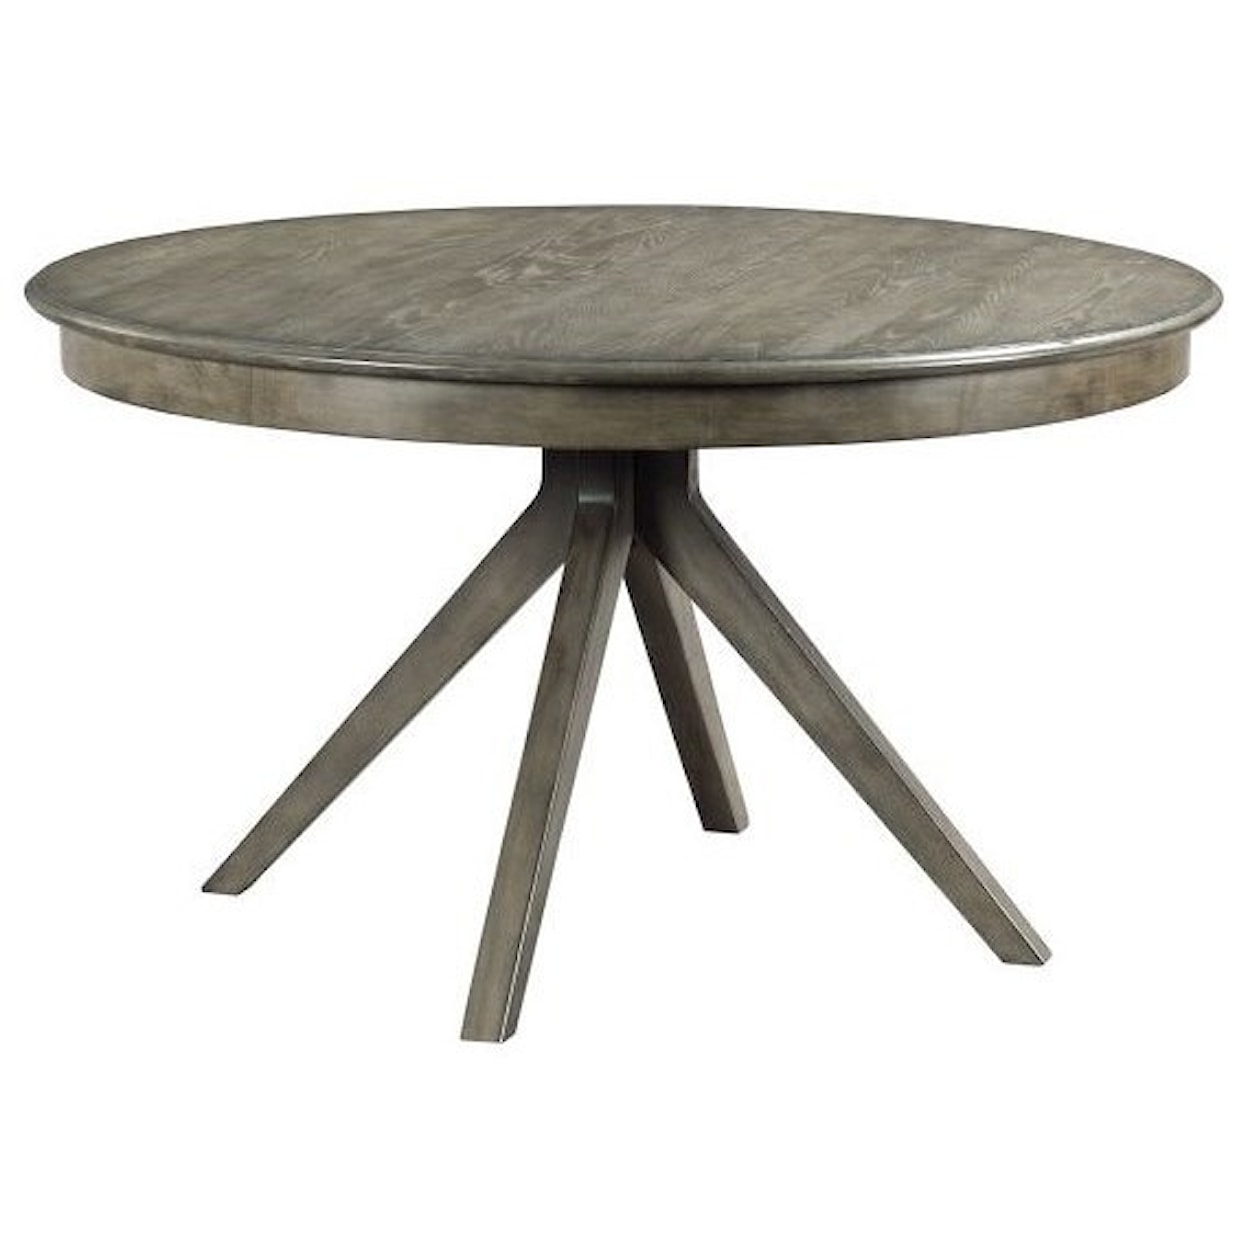 Kincaid Furniture Cascade Murphy Round Dining Table